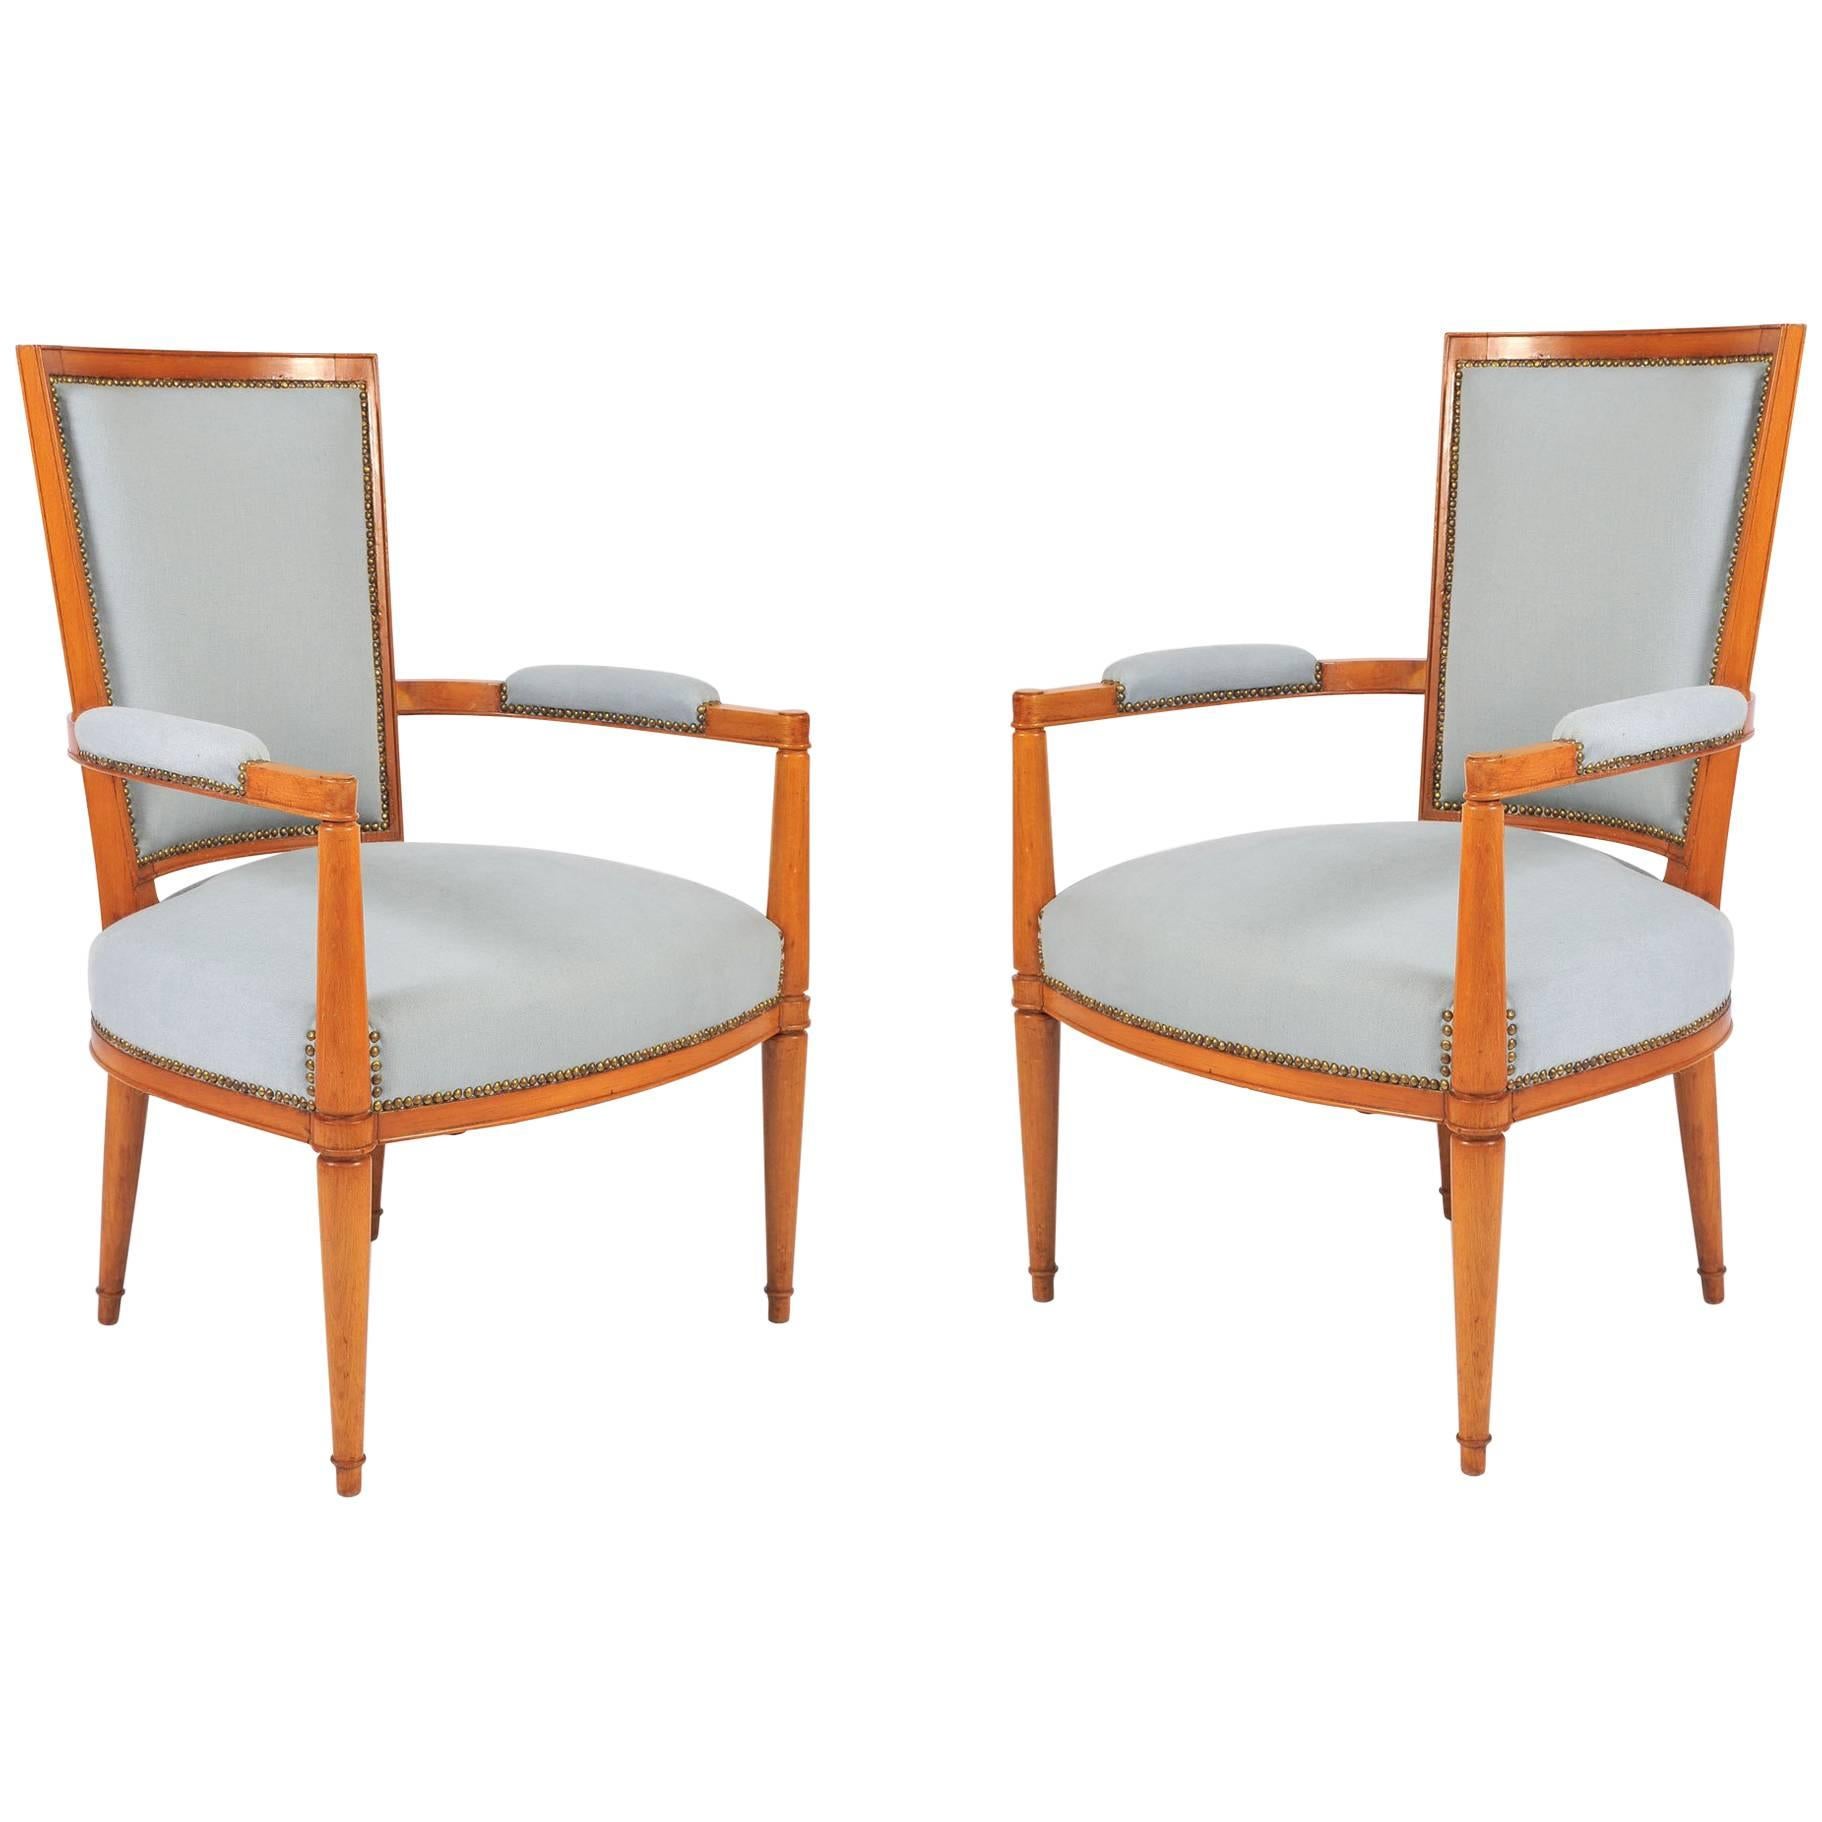 1930s French Occasional Chairs by André Arbus